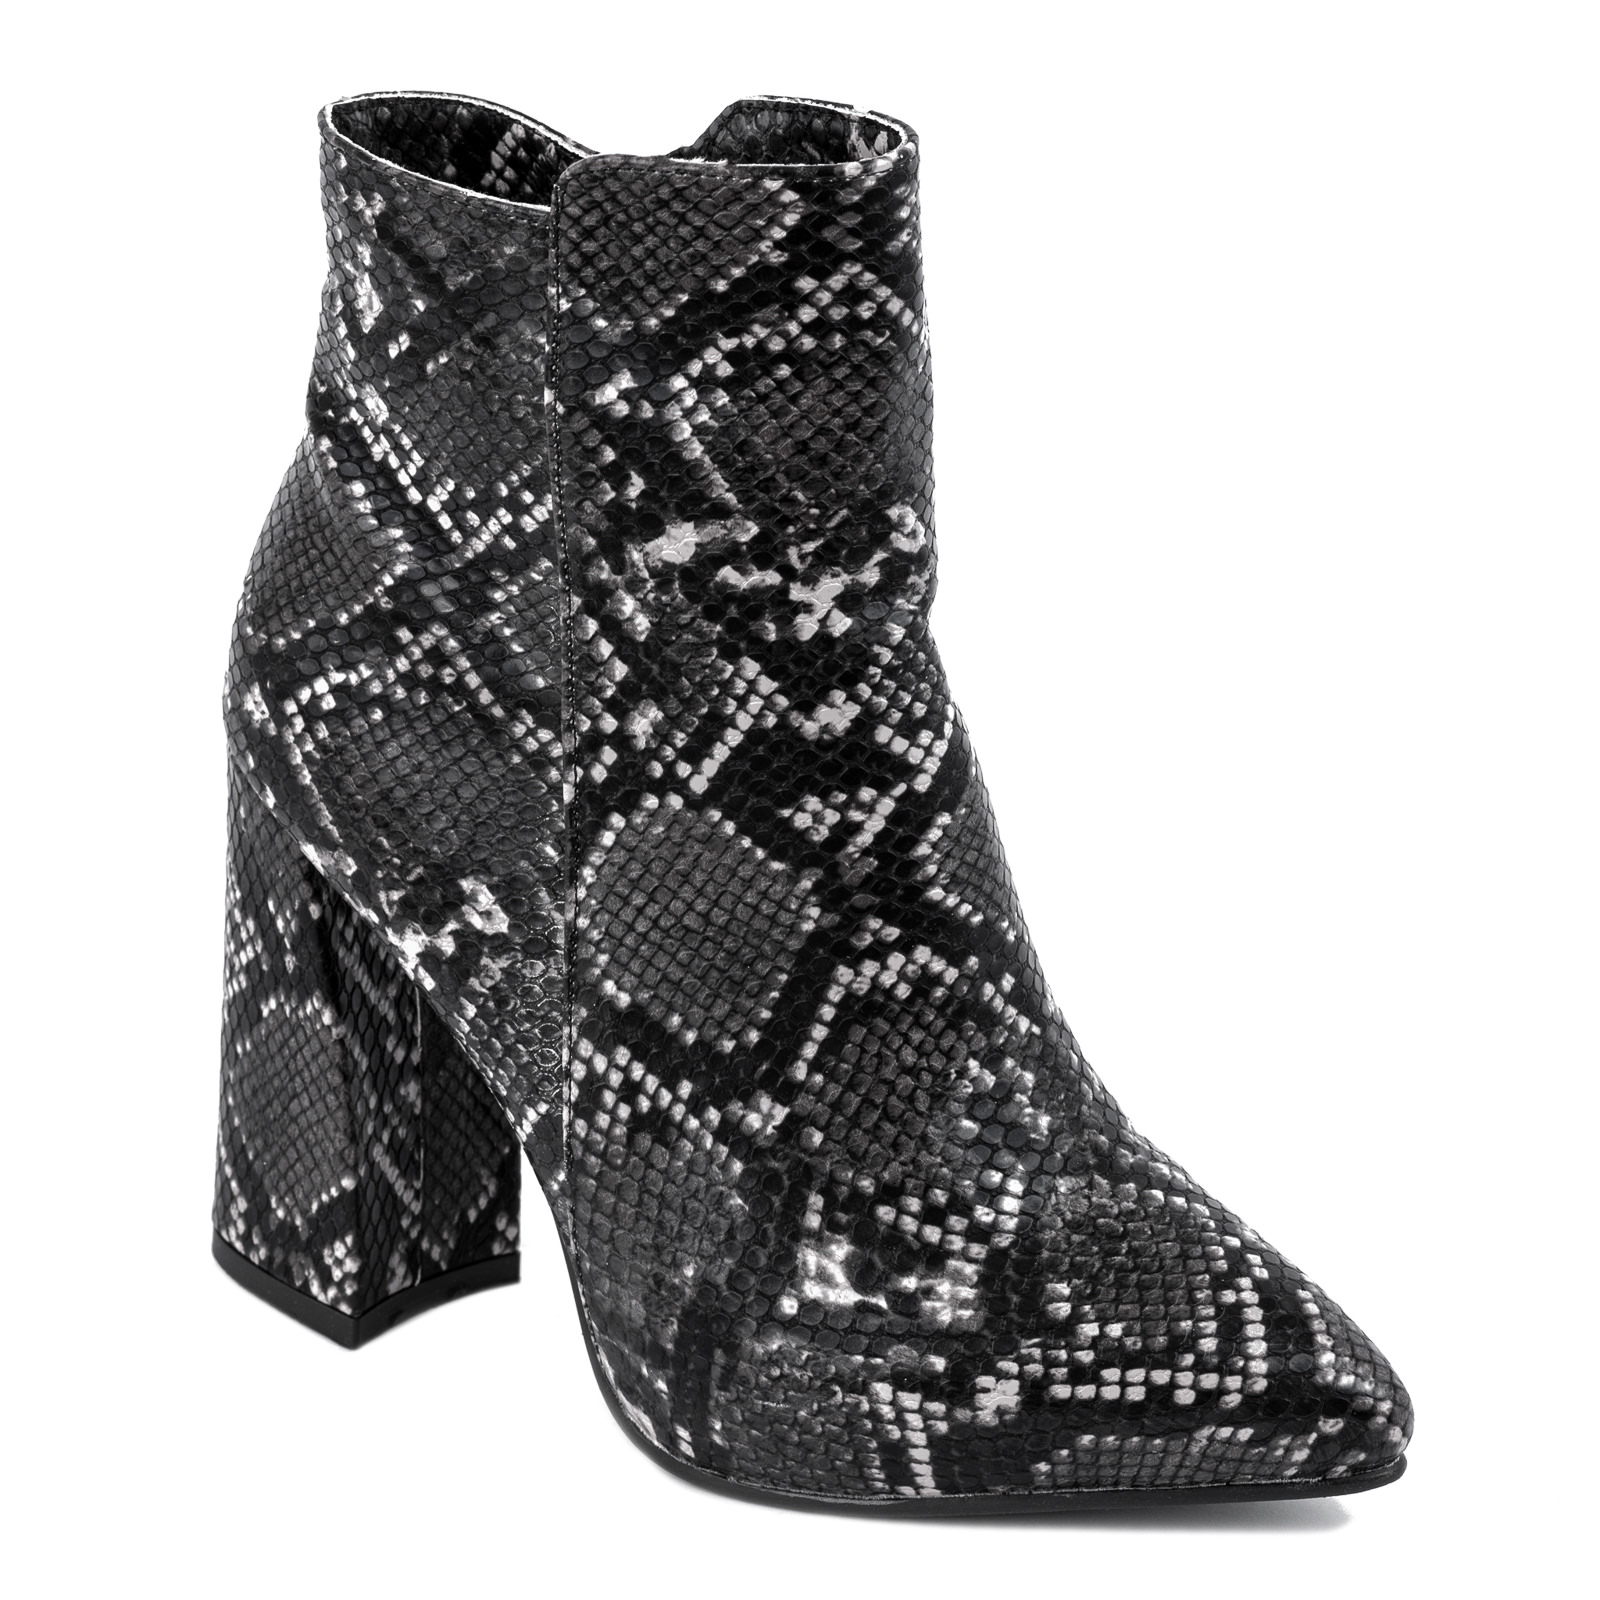 SNAKE ANKLE BOOTS WITH THICK HEEL - BLACK